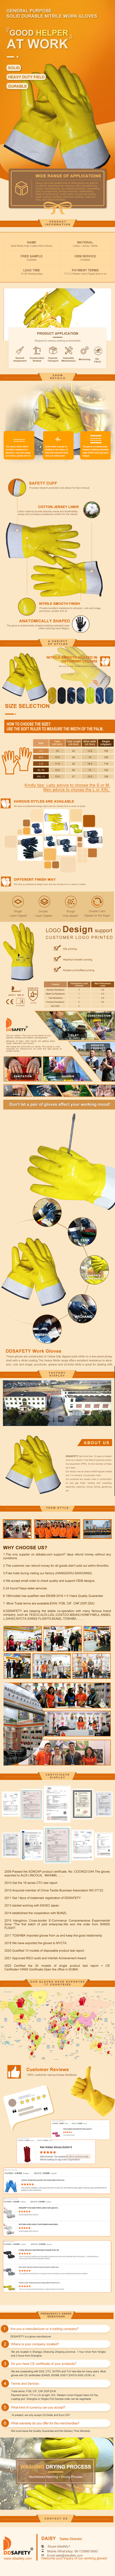 Fuel Oil Hauler Glove Fully Coated Nitrile,Abrasion Resistant One Size Fits All, Orange/White - DCN711 Fuel Oil Hauler Glove Fully Coated Nitrile,Abrasion Resistant One Size Fits All, Orange/White - DCN711 nitrile coated gloves,Fuel Oil Hauler Glove,Glove Fully Coated Nitrile